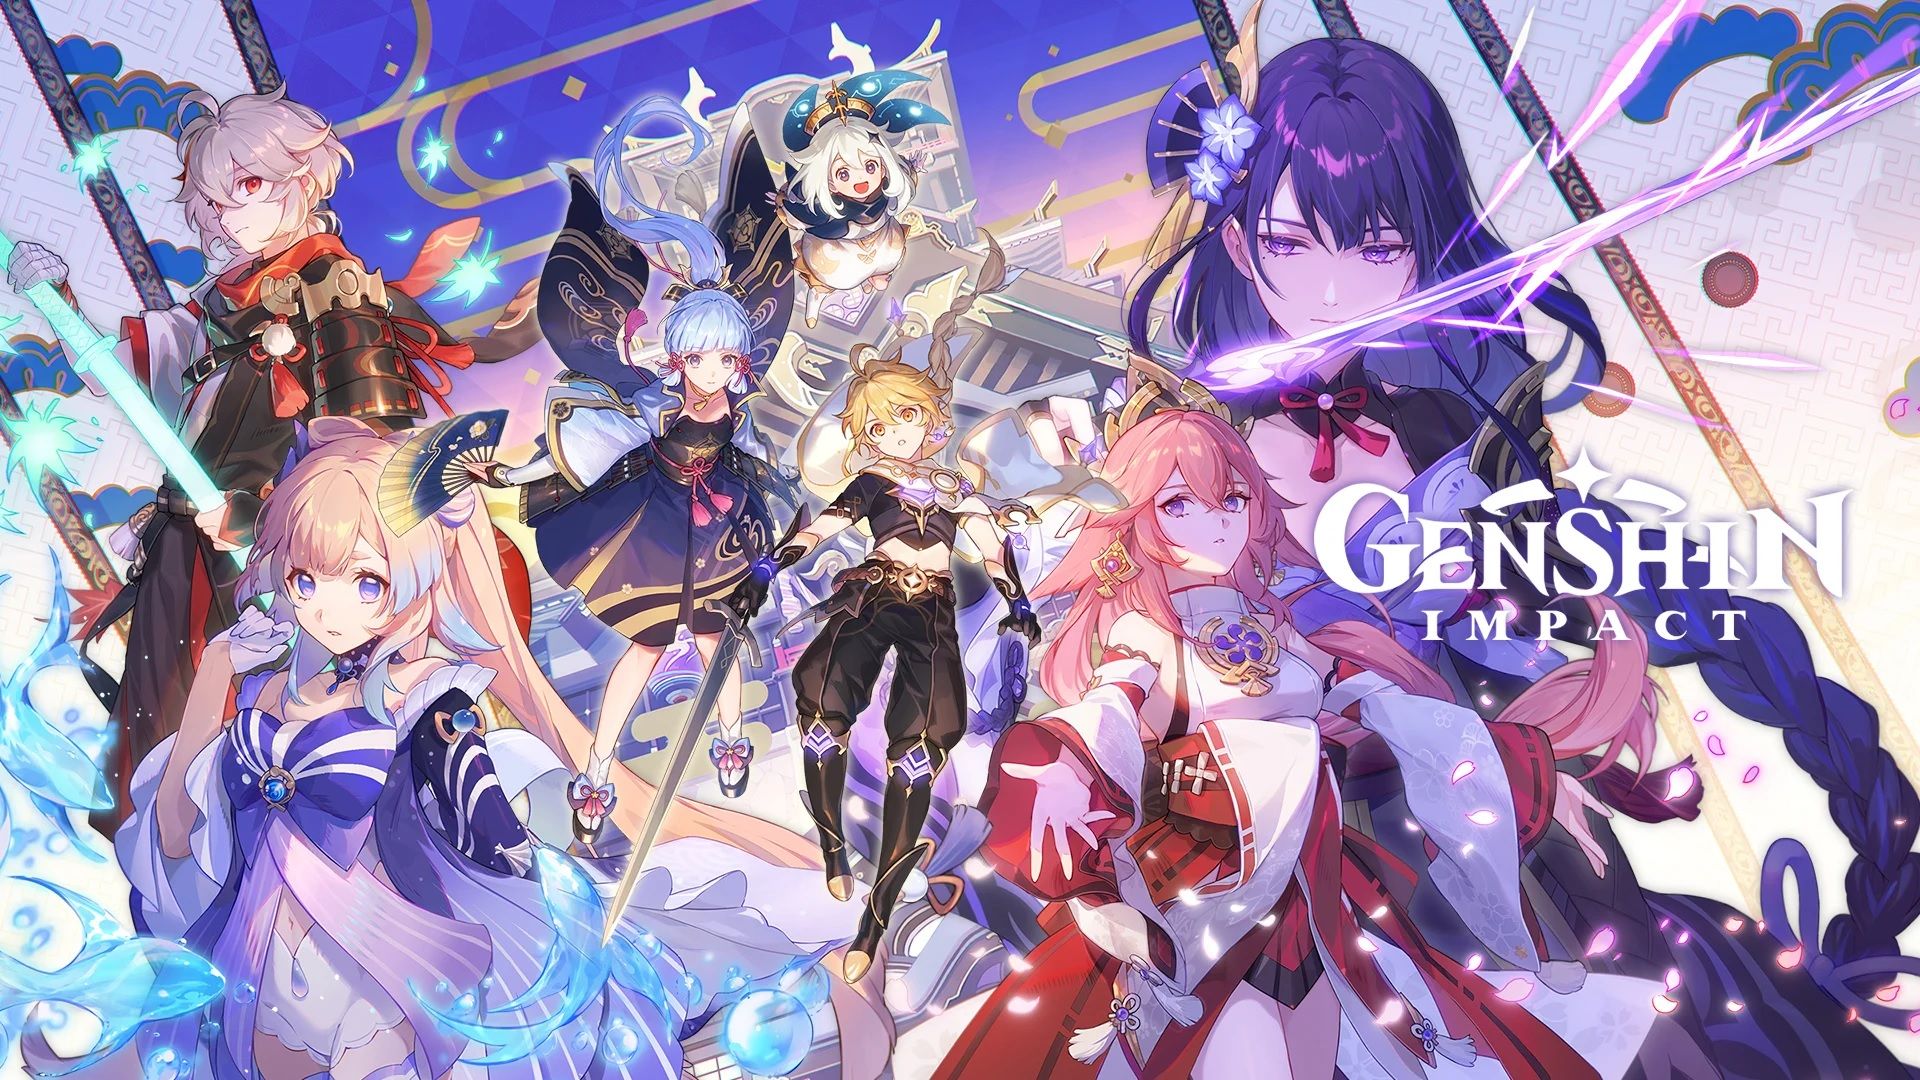 Genshin Impact  Prime offer rewards in October 2021: All you need to  know